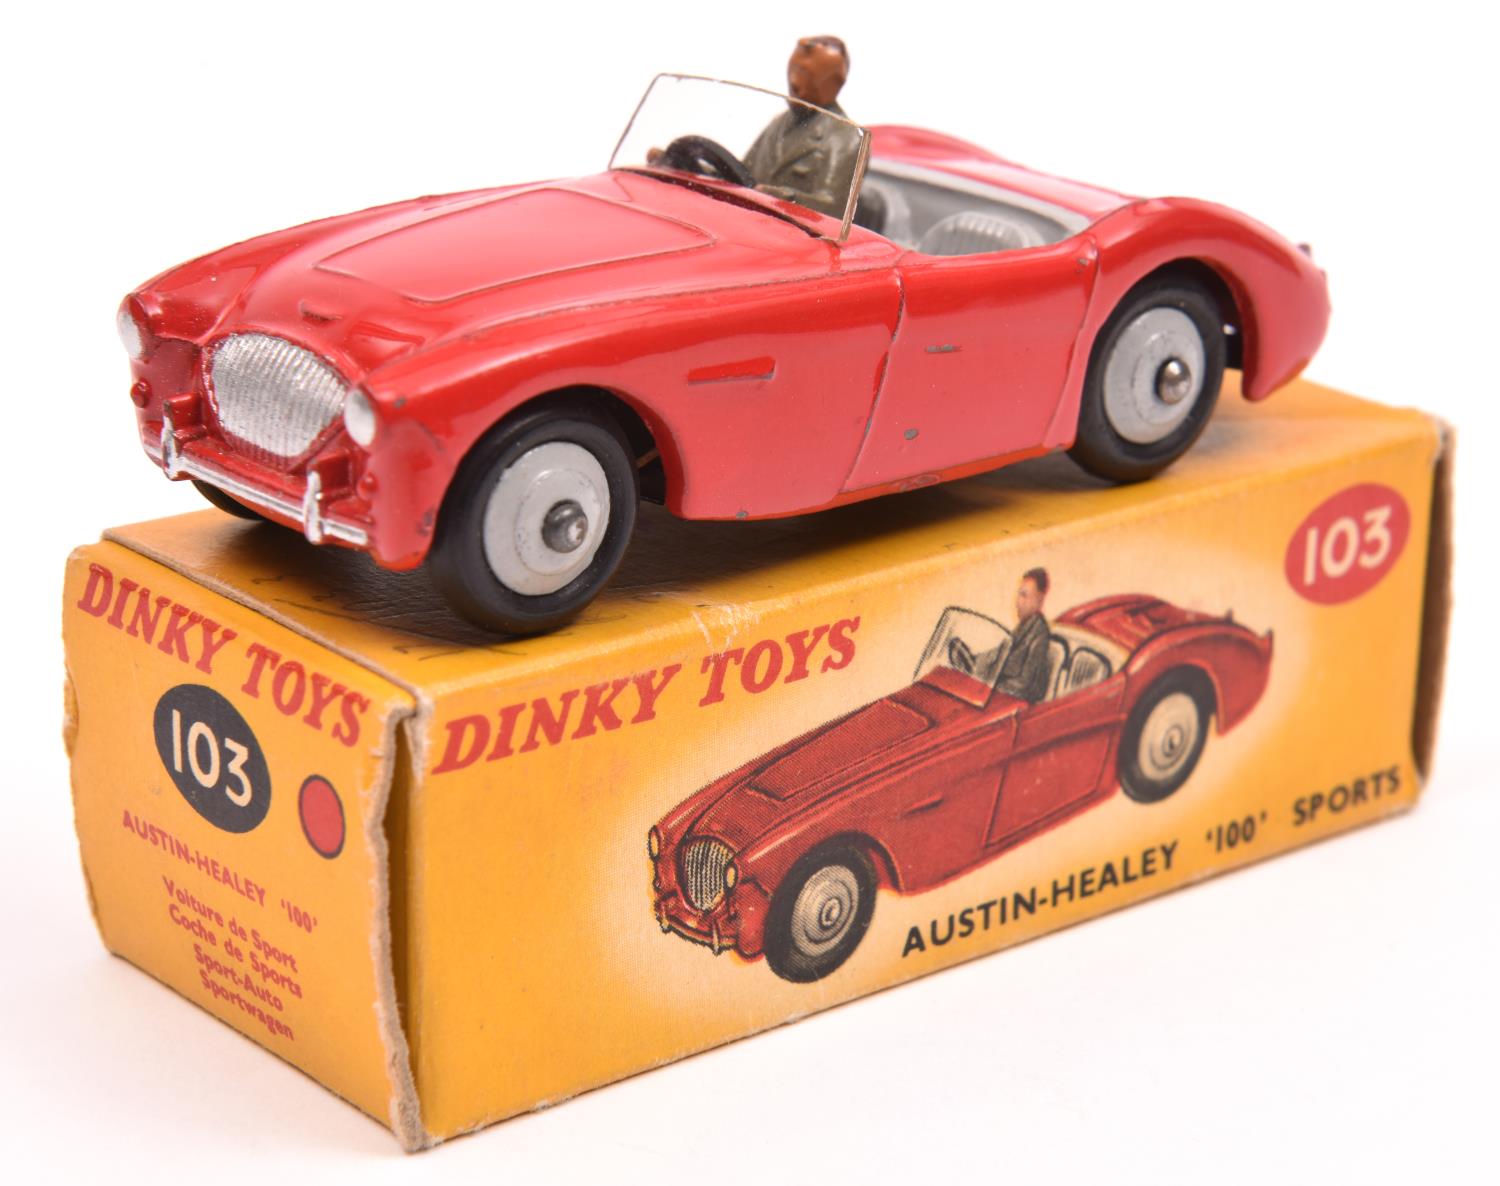 Dinky Toys Austin-Healey '100' Sports (103). A harder to find example in red with light grey